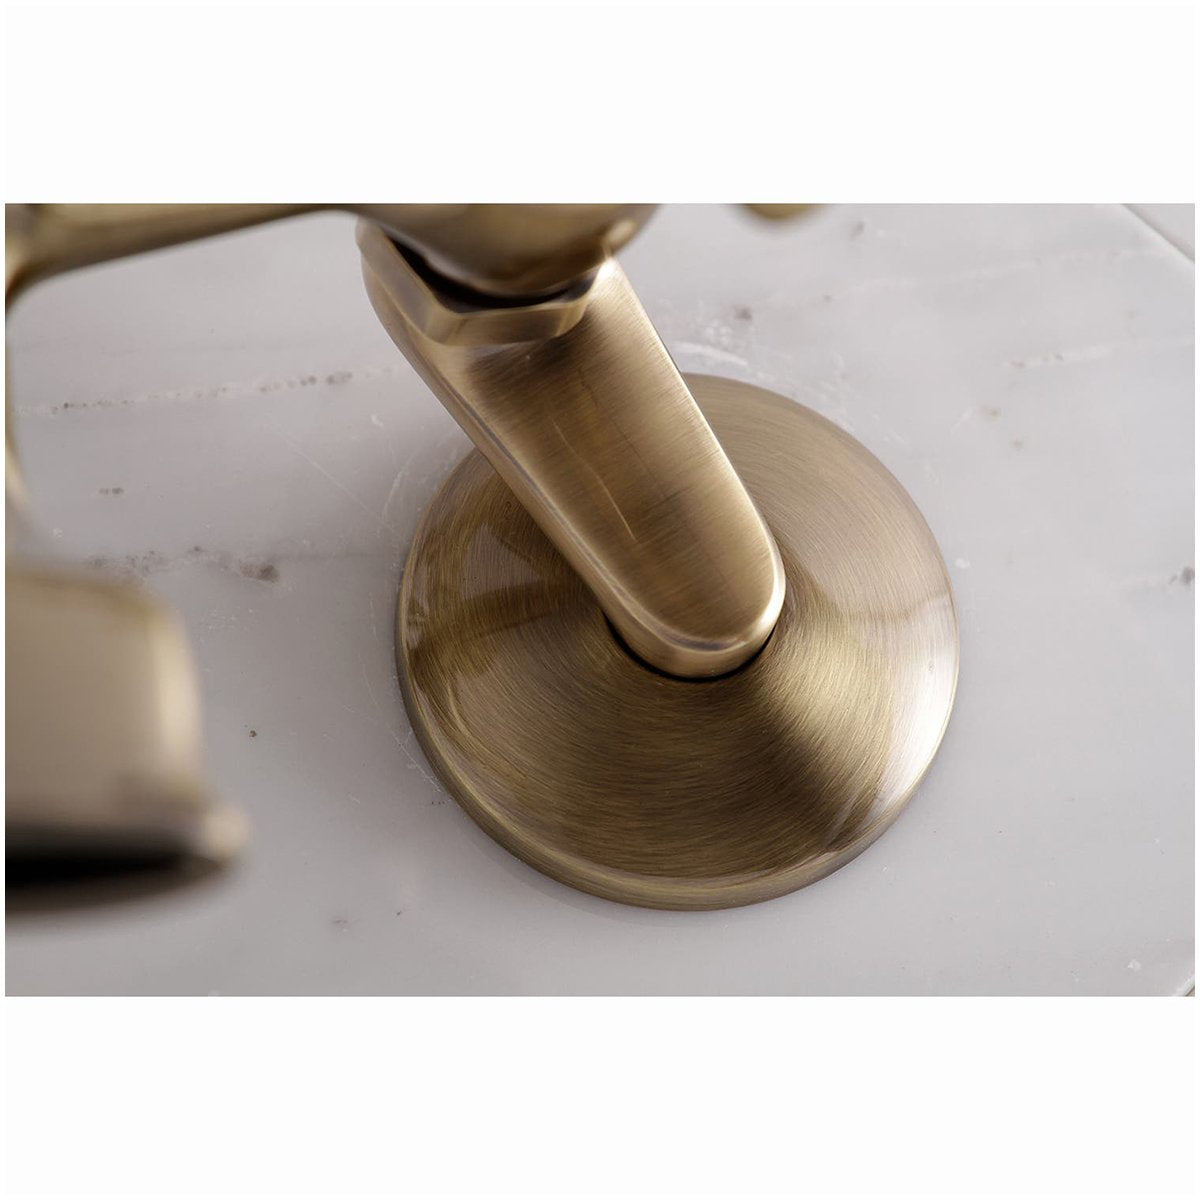 Kingston Brass Kingston Wall Mount Clawfoot Tub Faucet with Hand Shower